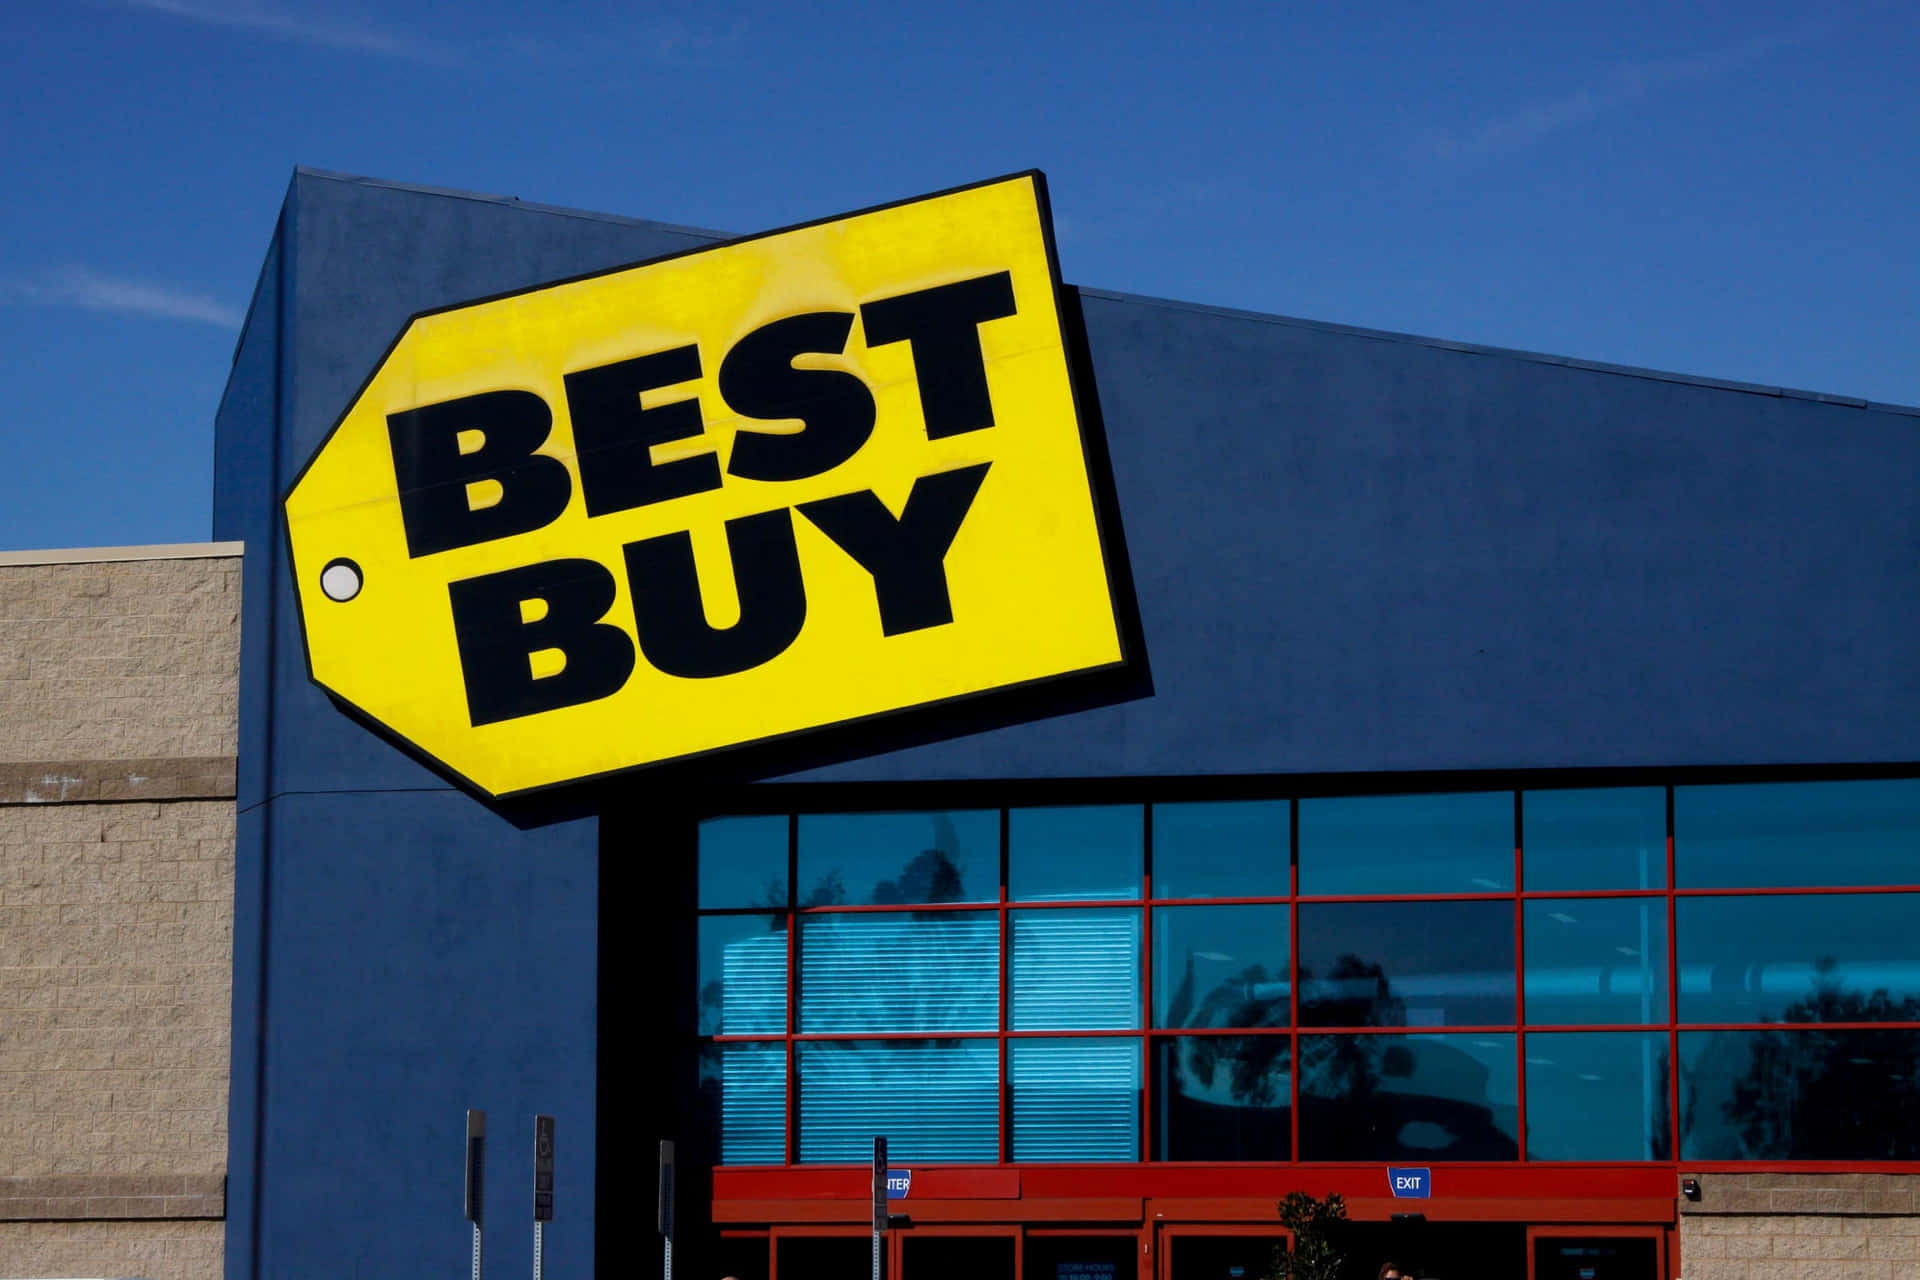 Get the latest tech products at Best Buy!